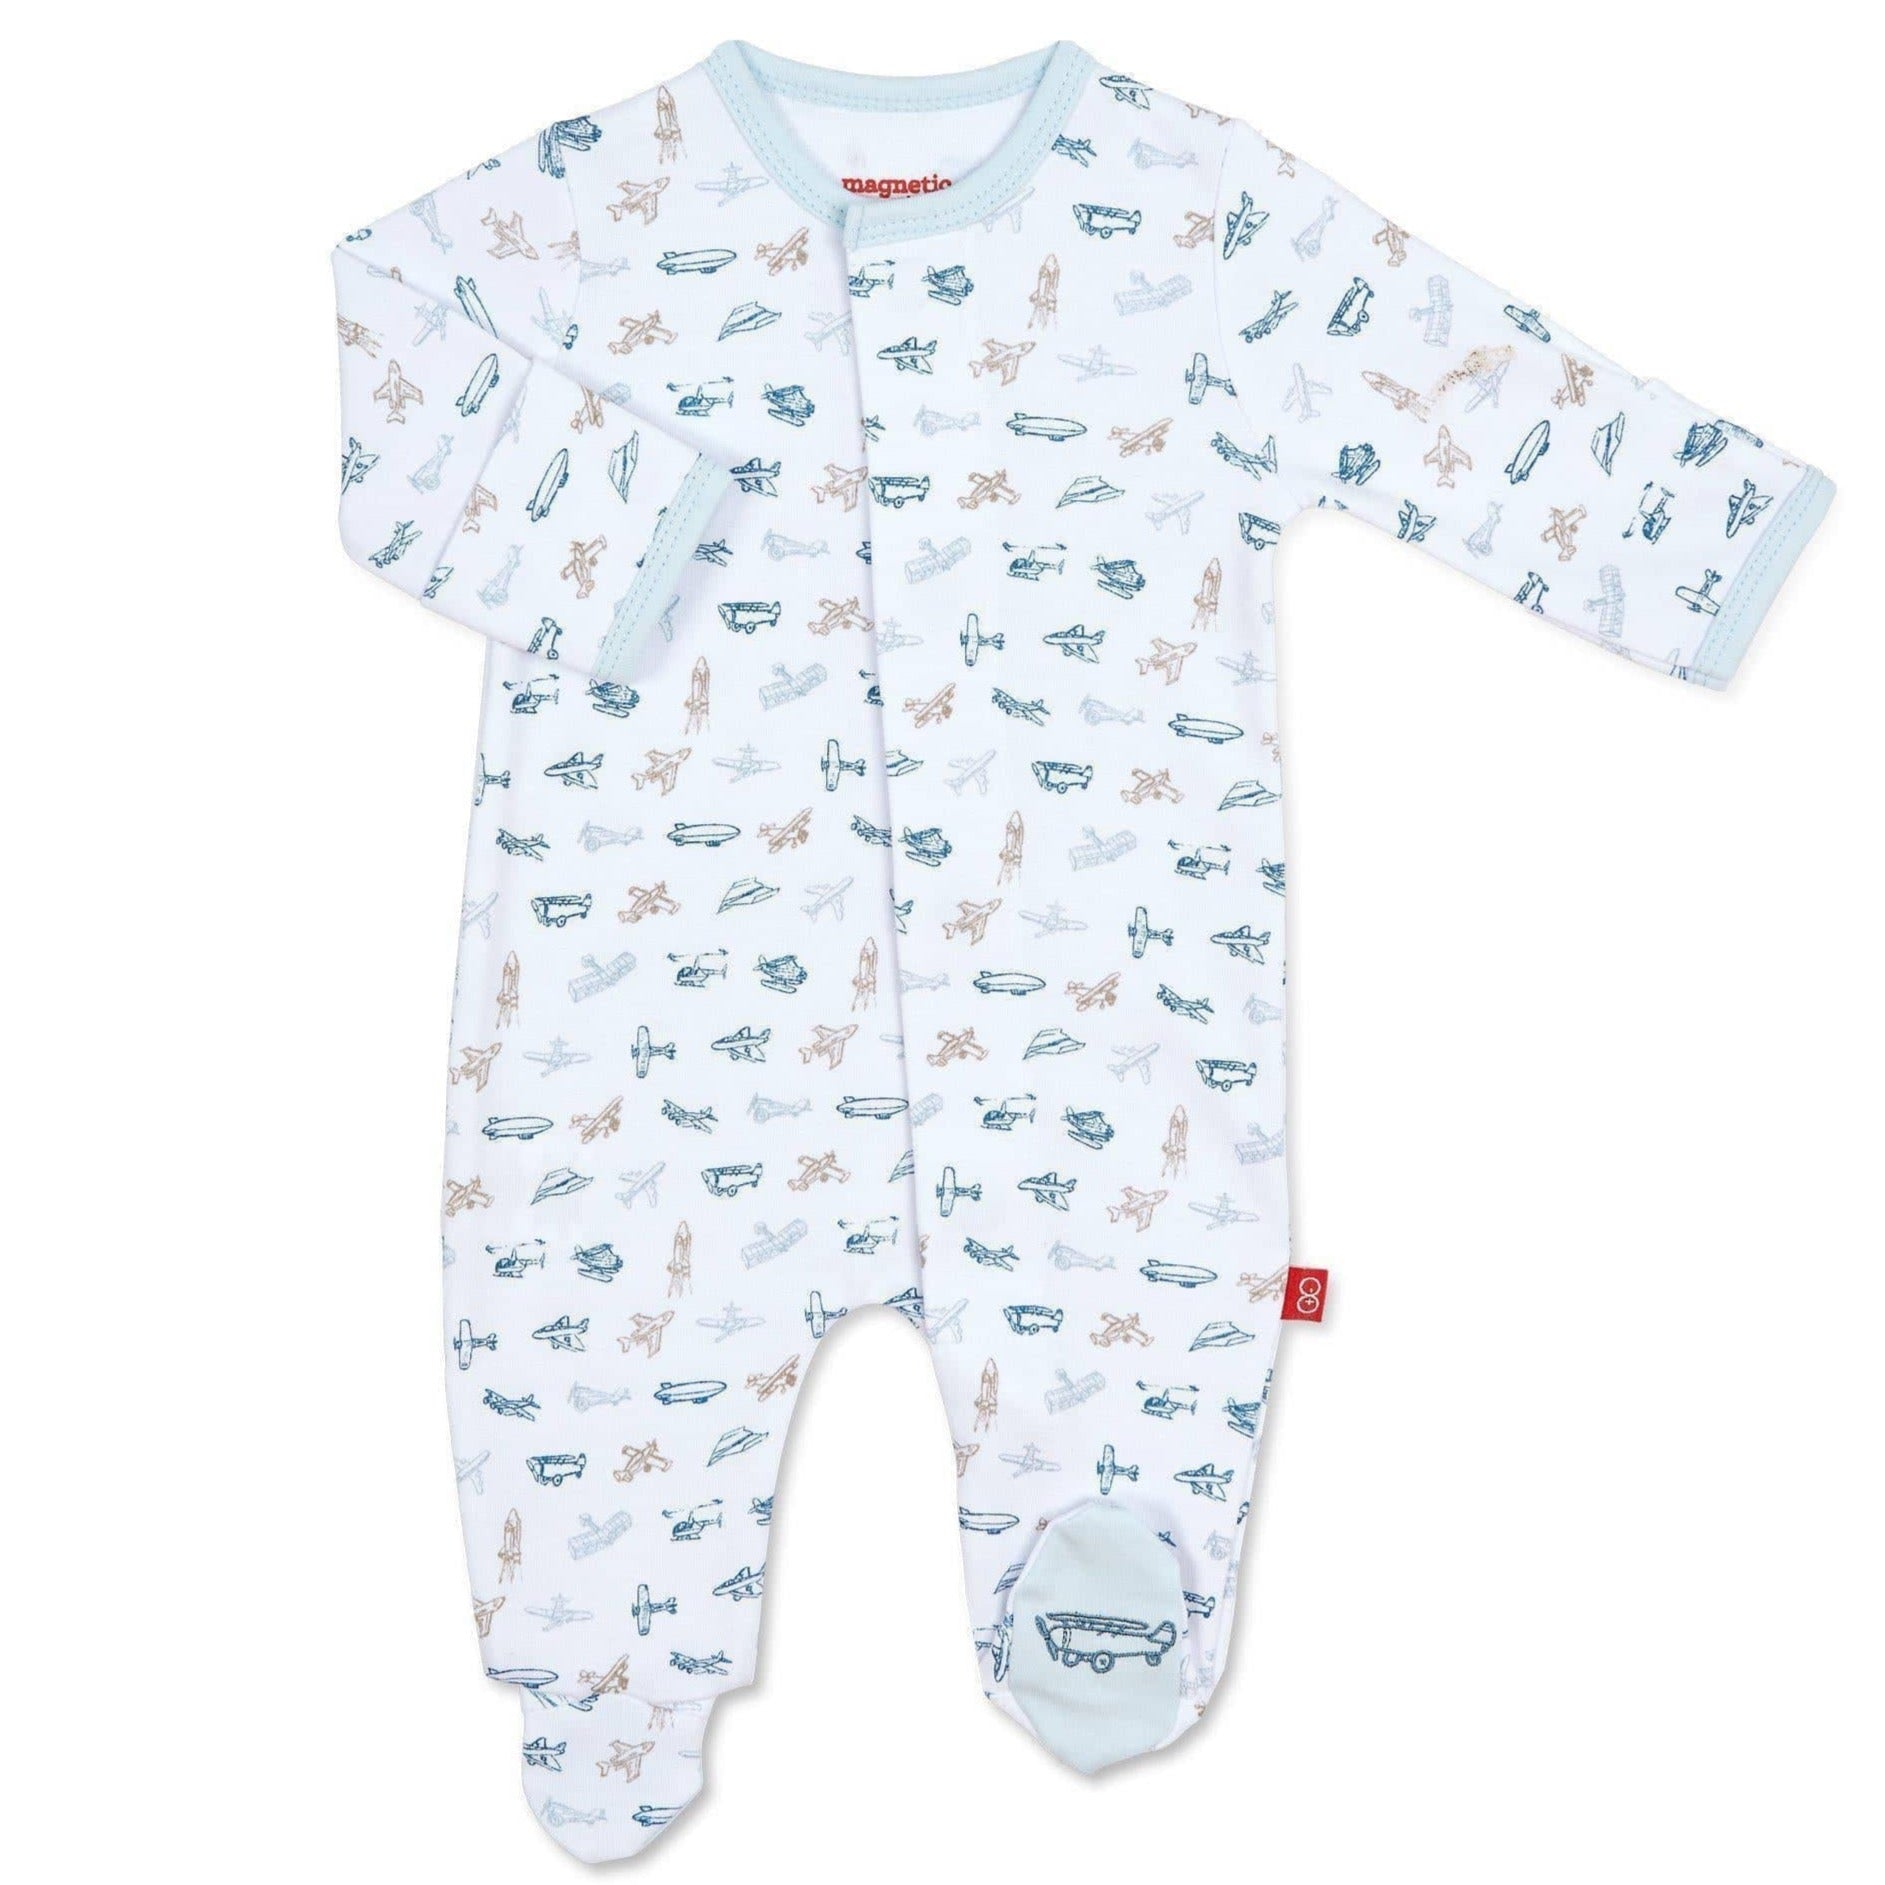 Blue long sleeve baby onesie with airplanes on it